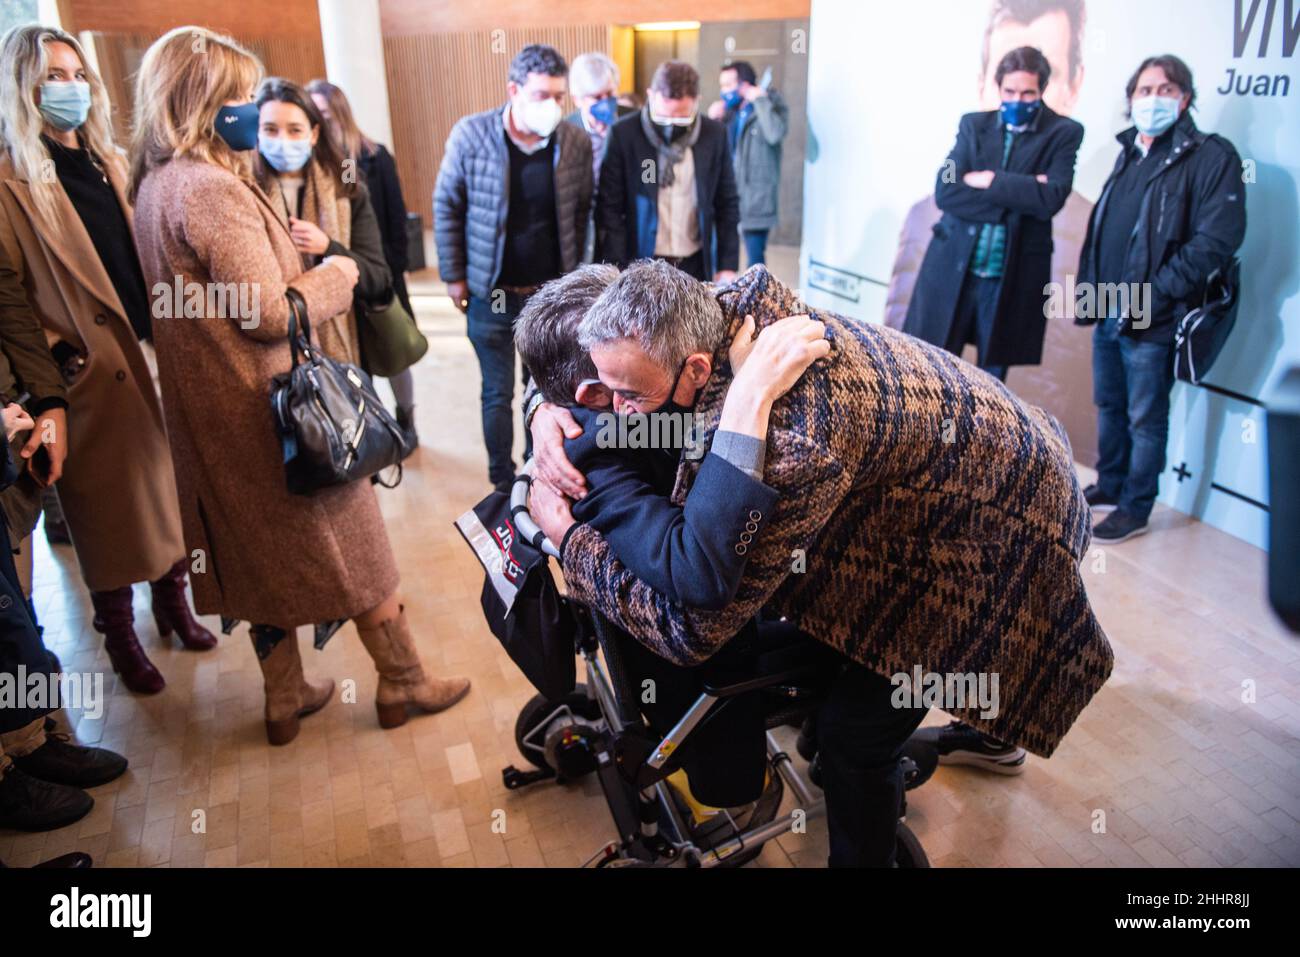 25th January 2022: Hospital de la Santa Creu i Sant Pau, Barcelona, Catalonia, Spain: Football Industry meeting to discuss the neurodegenerative disorder illness which has affected ex-Barcelona player and assistant manager Juan Carlos Unzue. Juan Carlos Unzue hugs Luis Enrique while attending the photocall Stock Photo